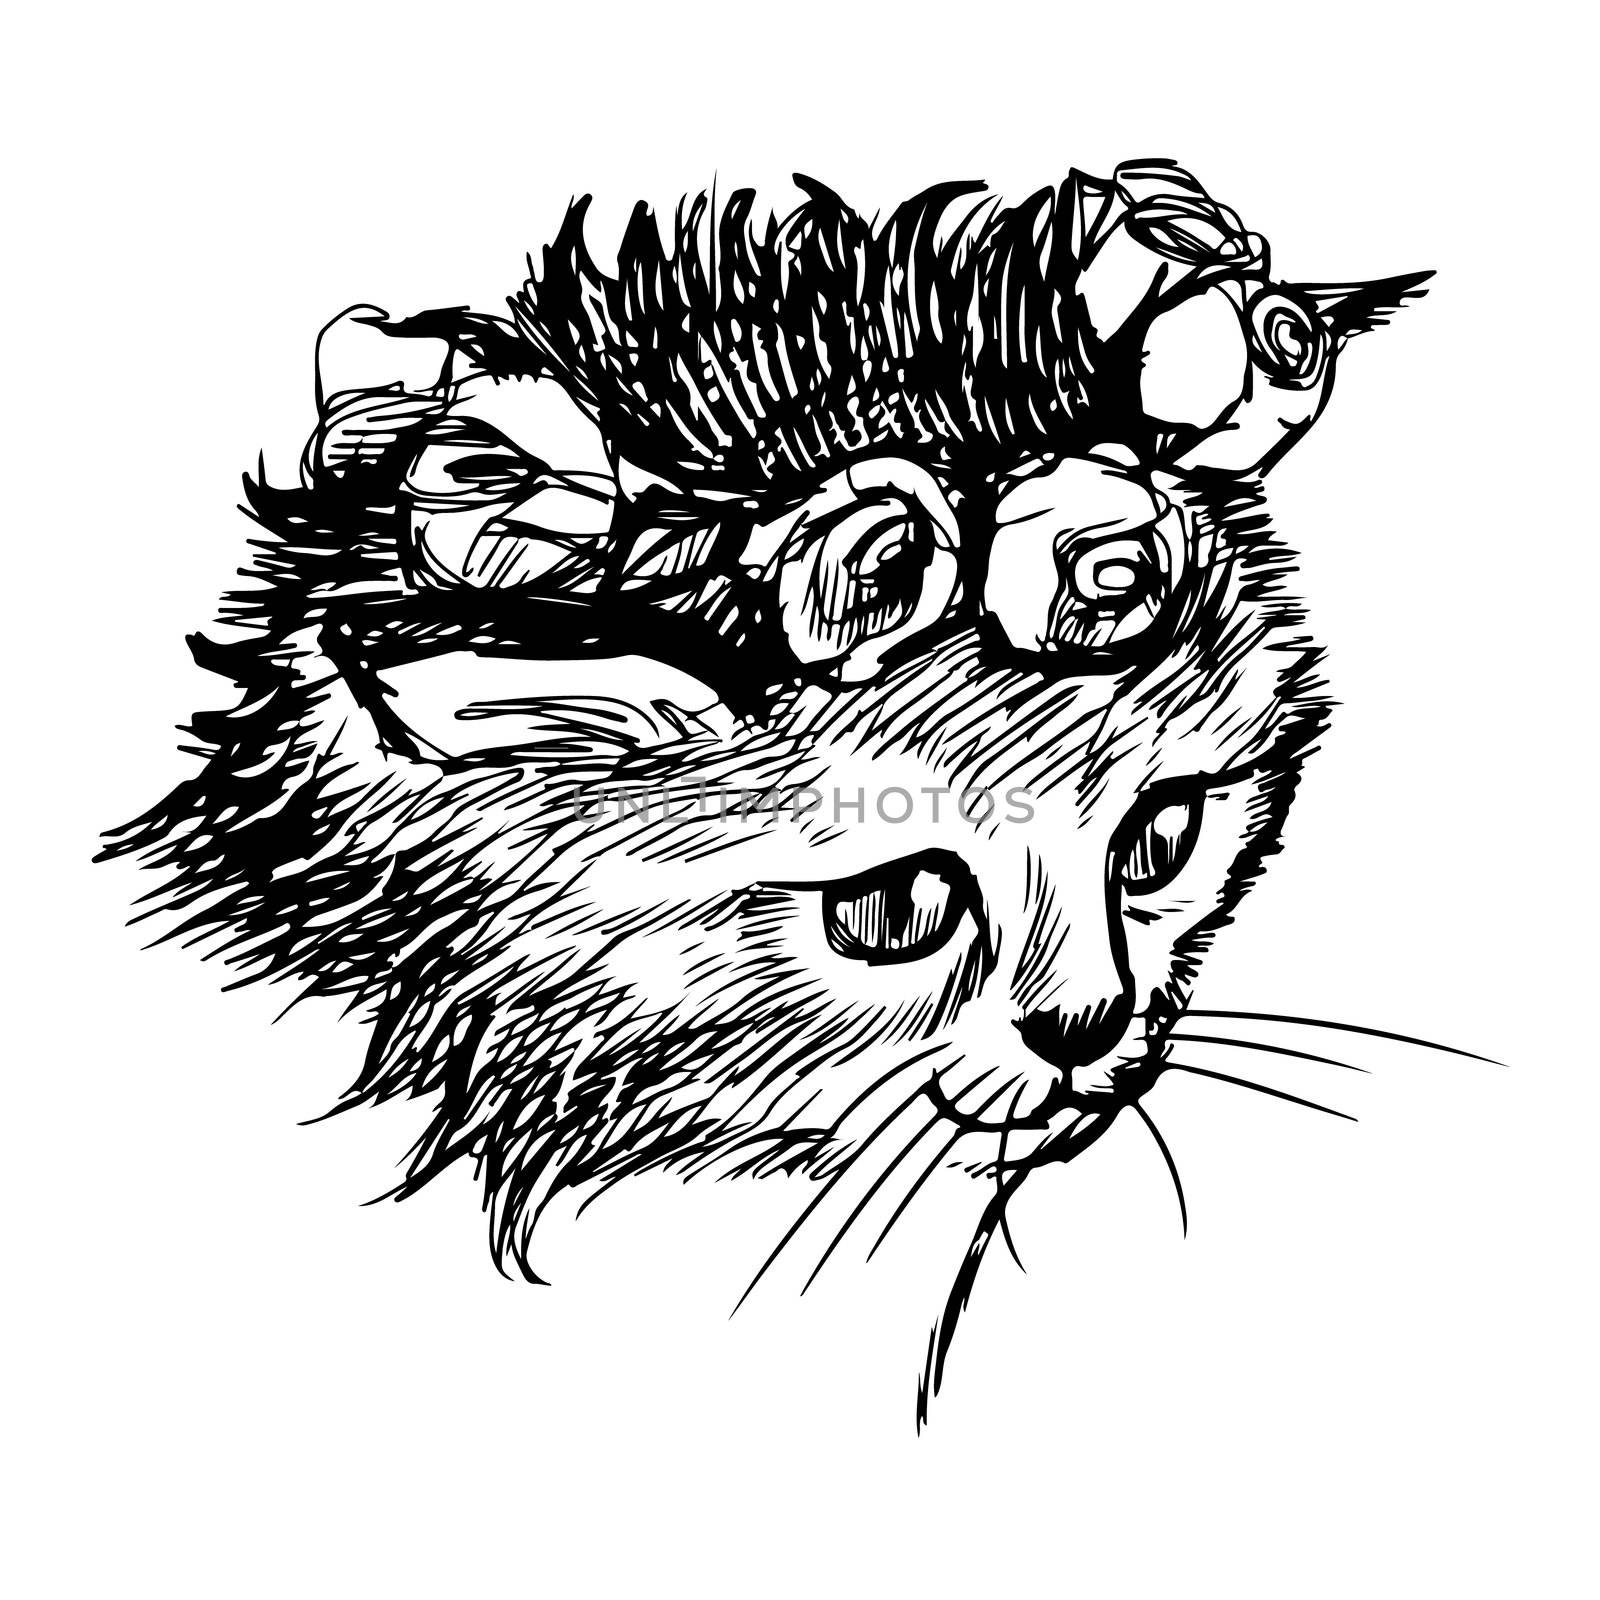 freehand sketch illustration of little cat, kitten, doodle hand drawn